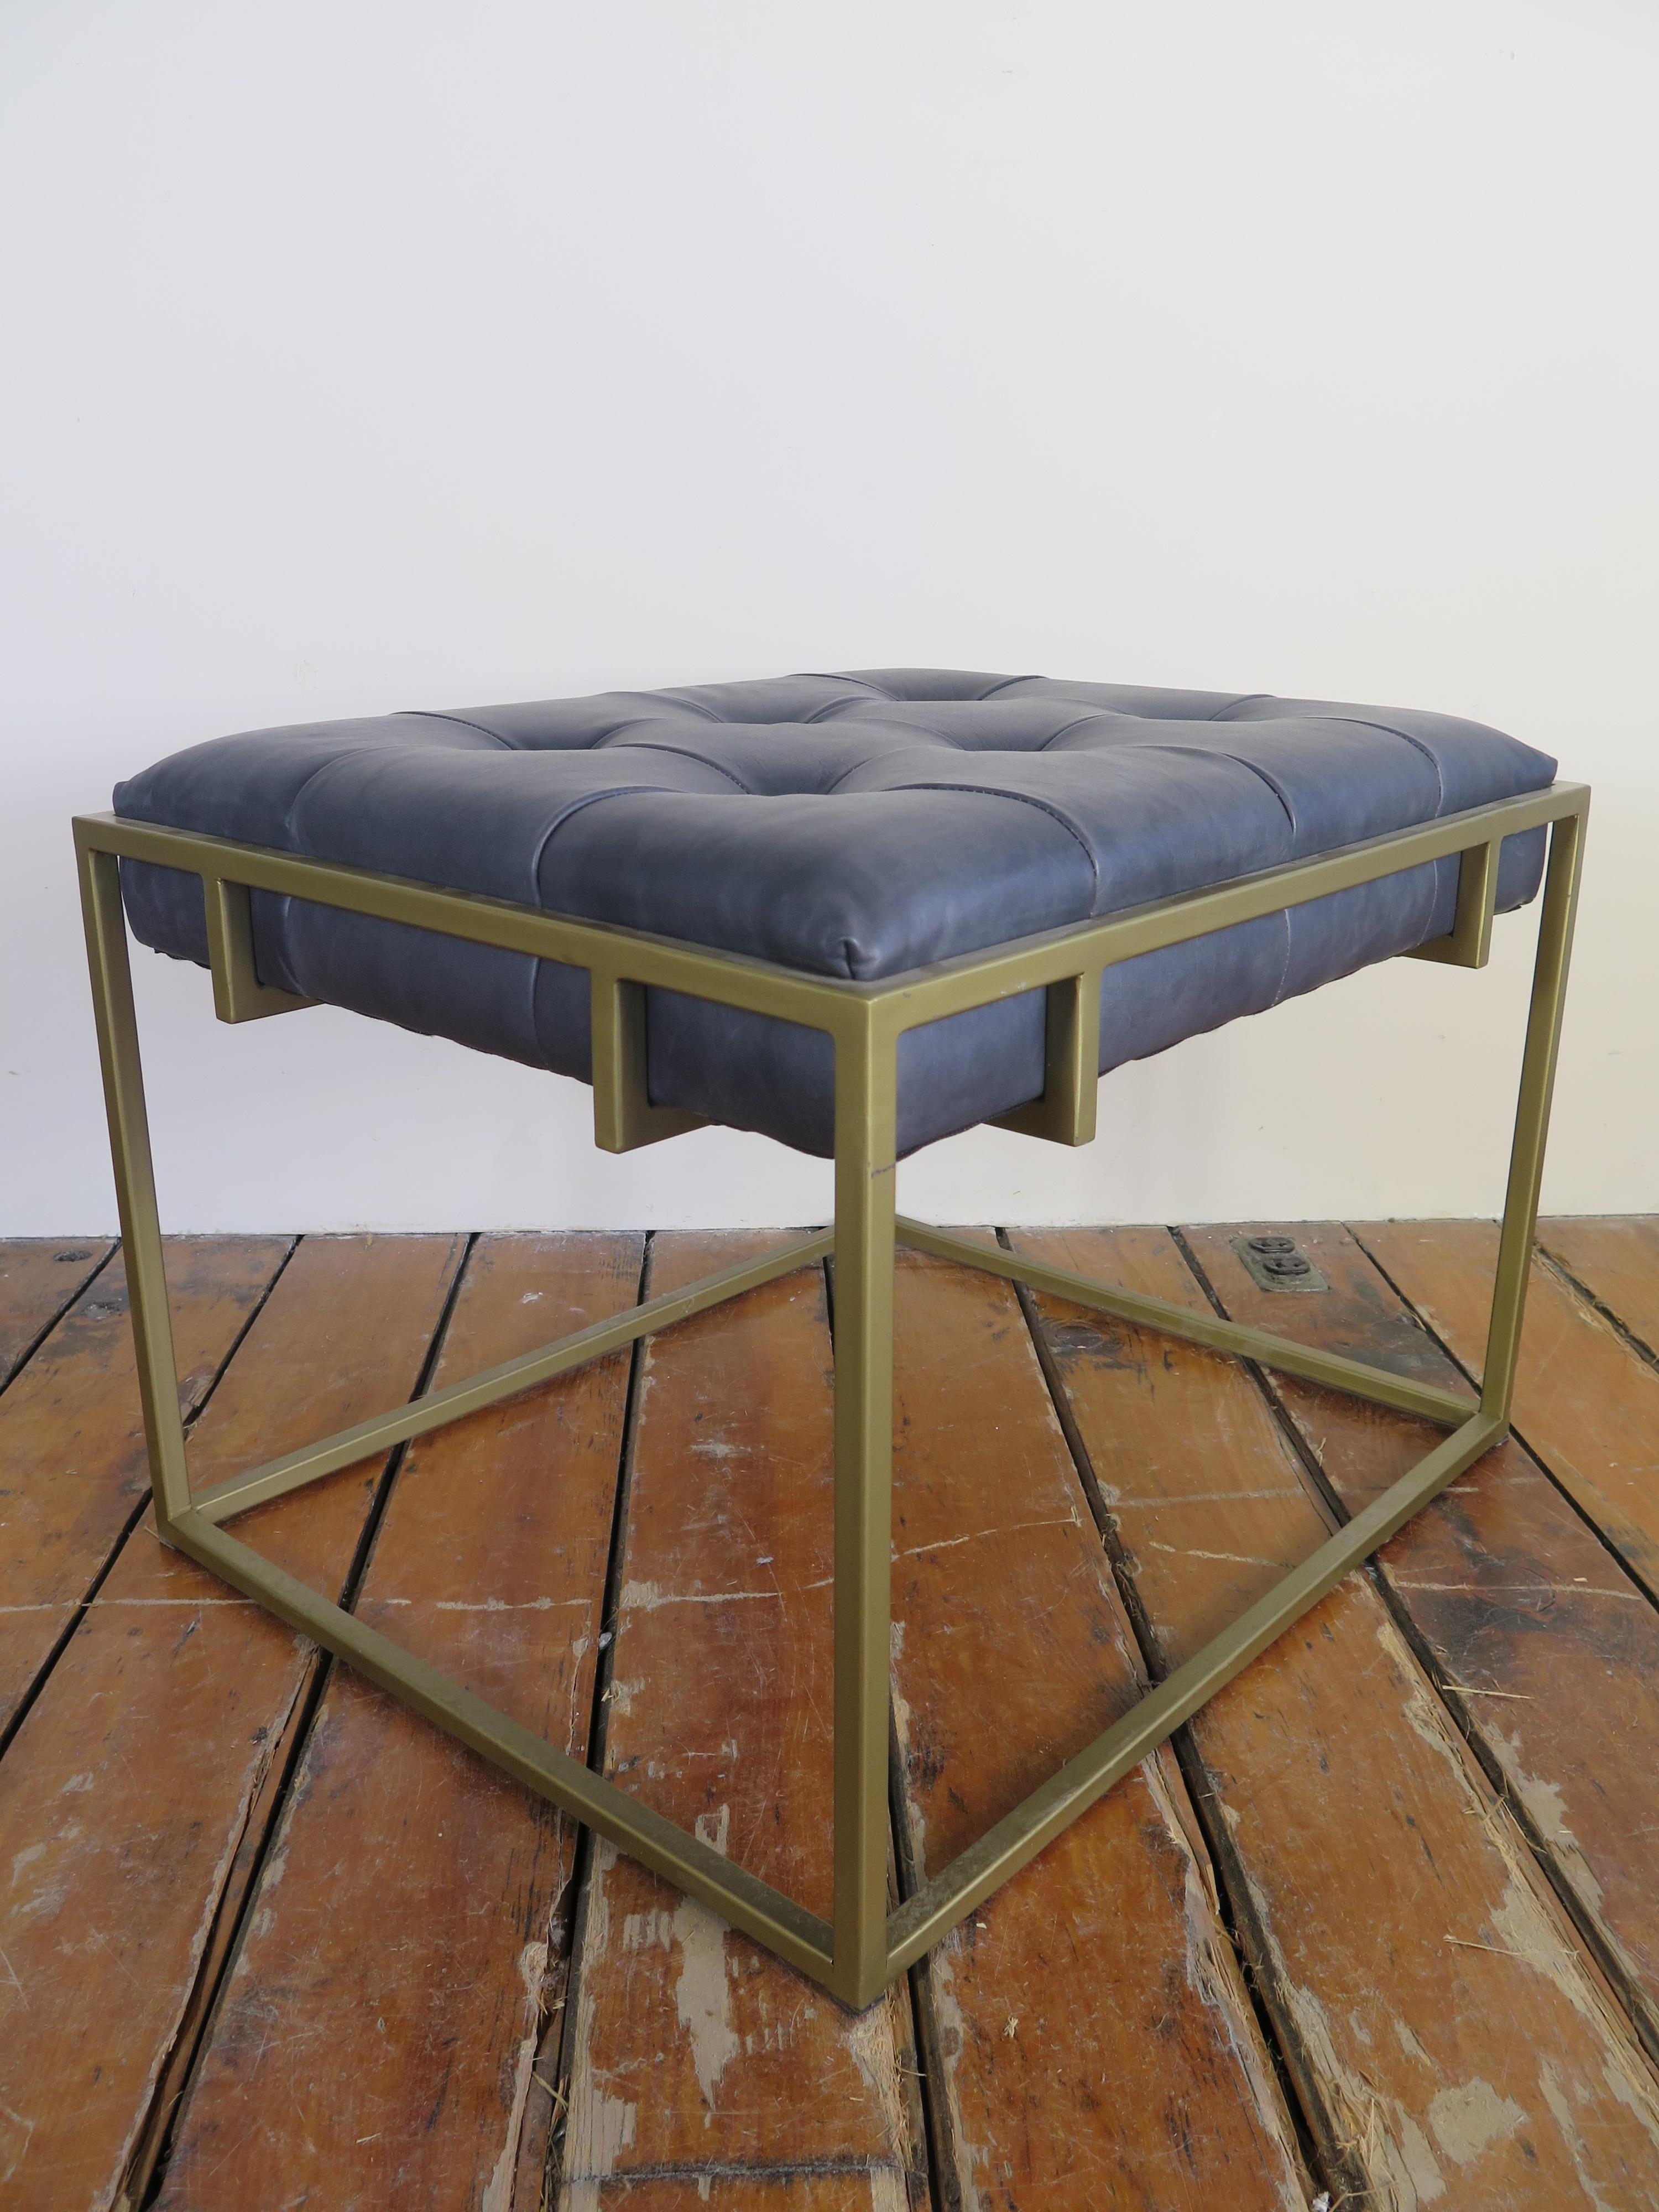 Contemporary Leather Tufted Ottoman